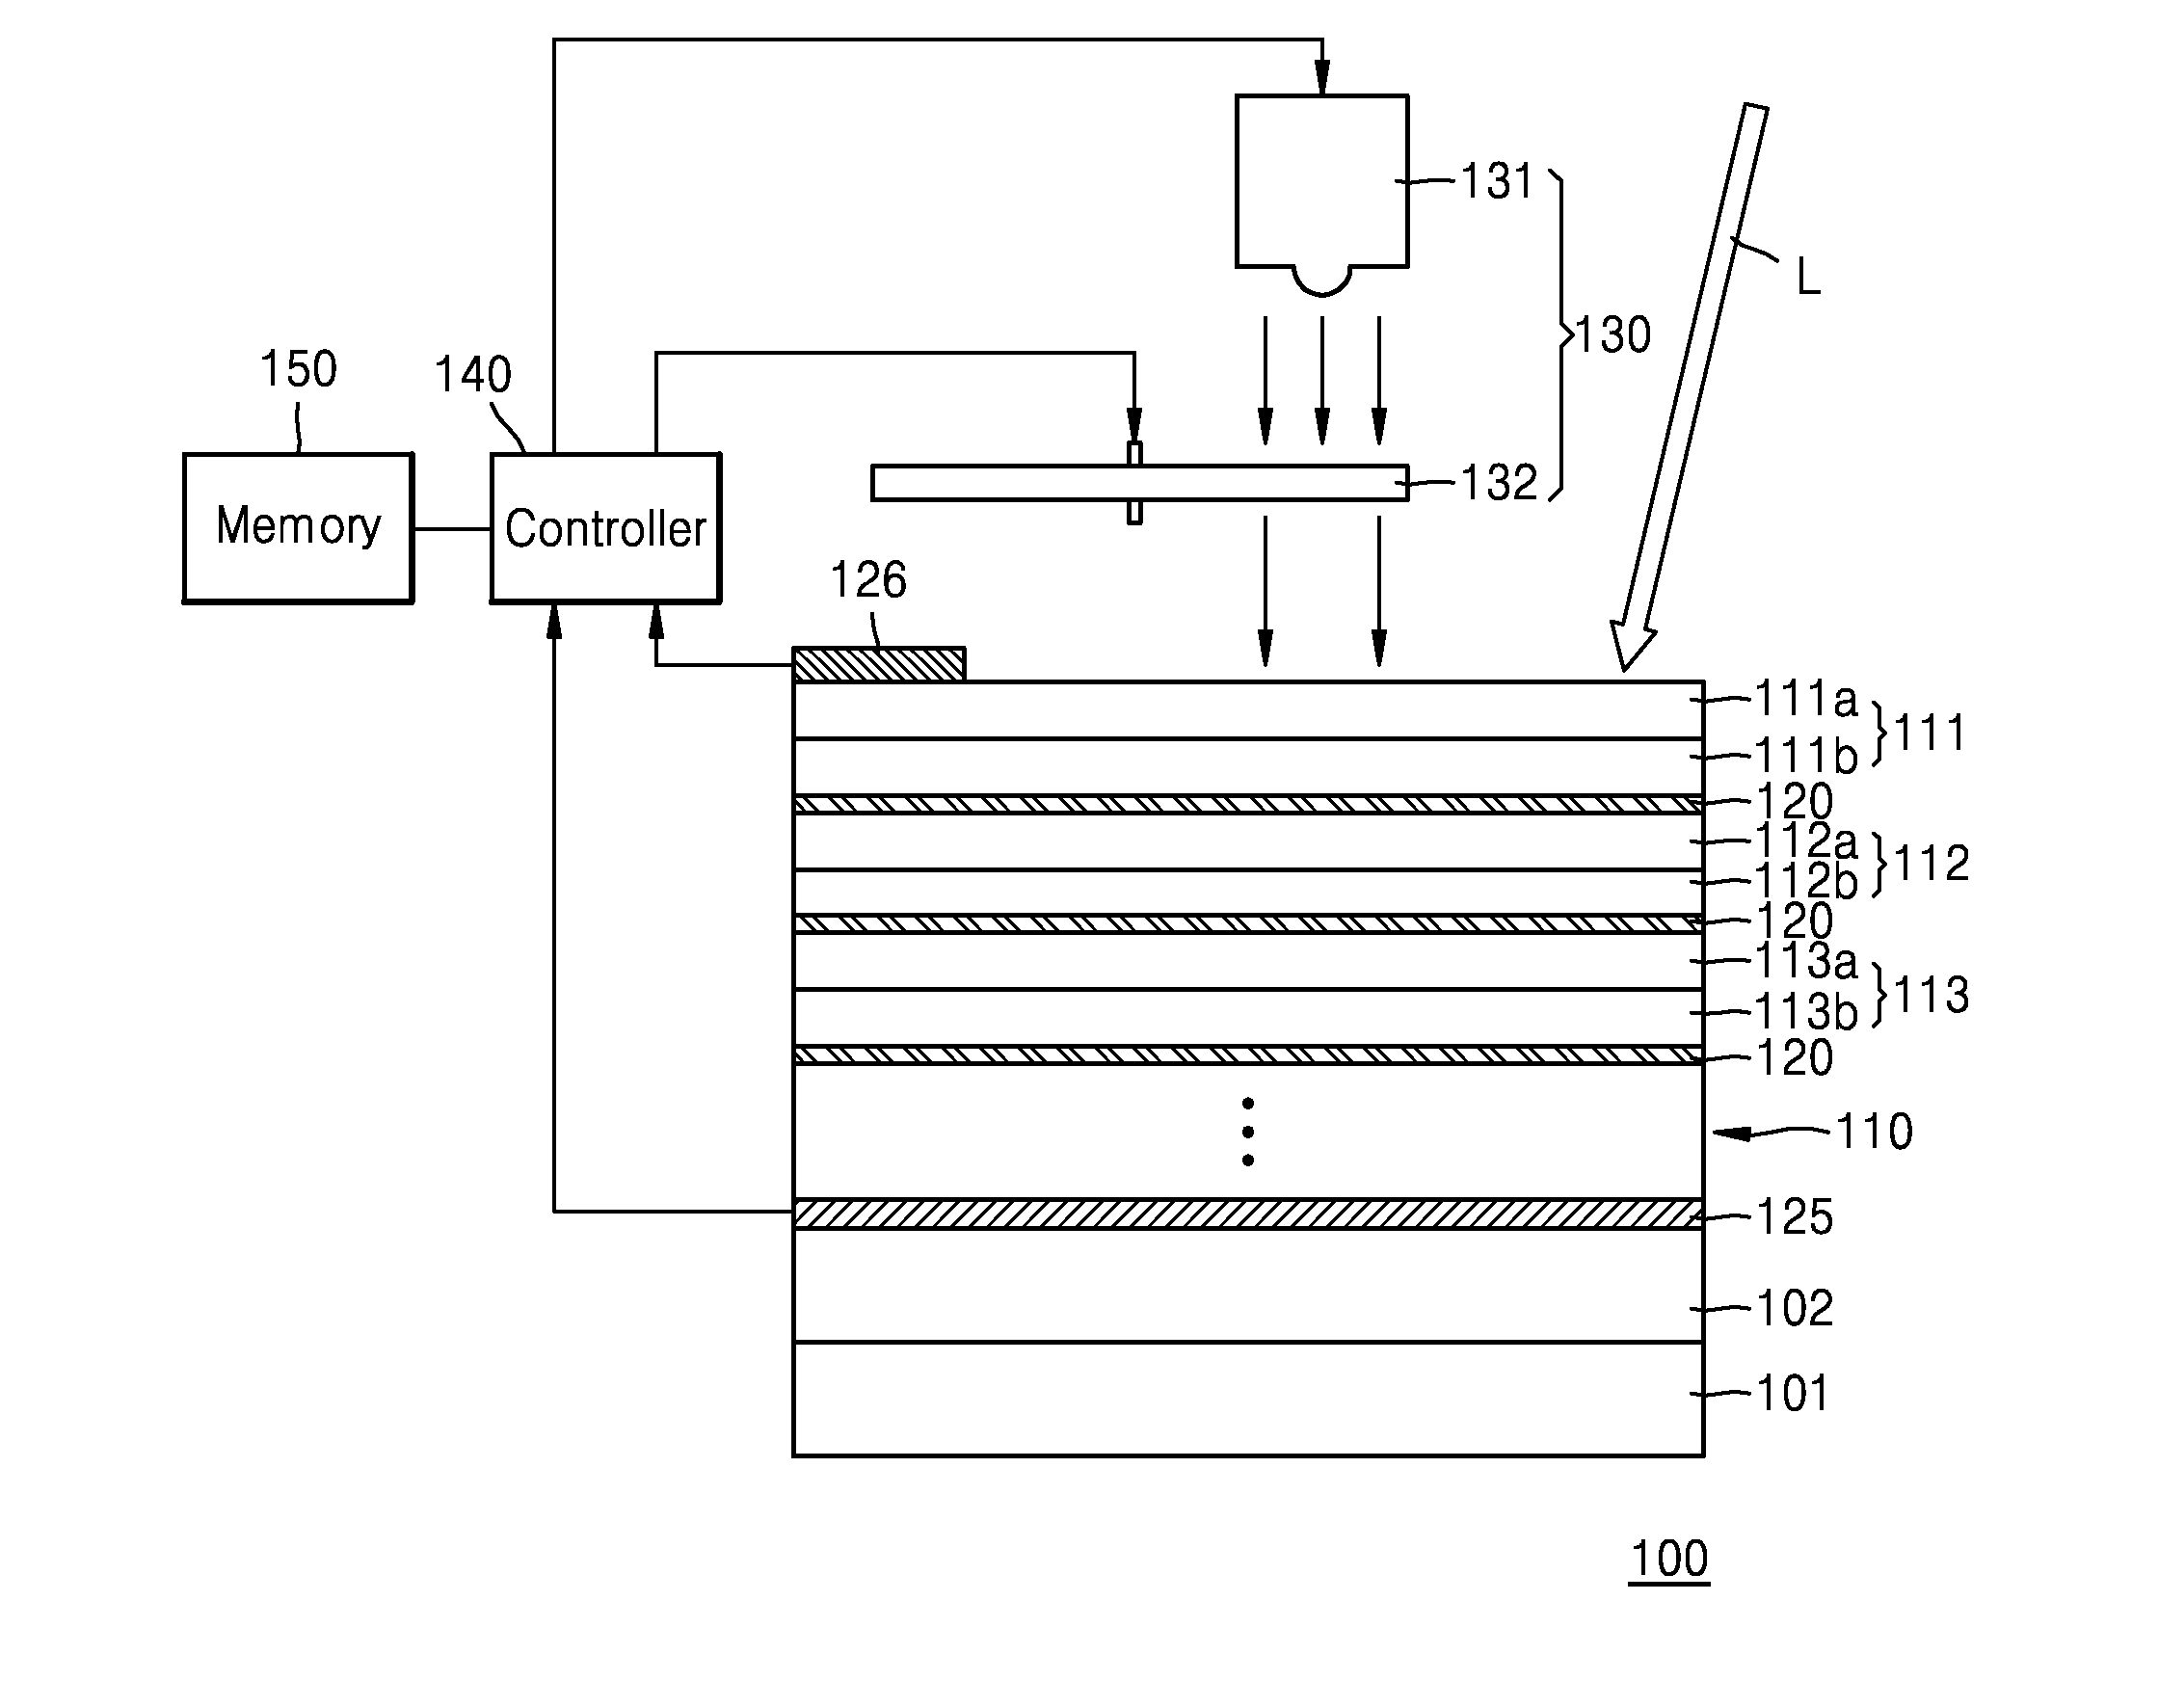 Spectrometer including vertical stack structure and non-invasive biometric sensor including the spectrometer